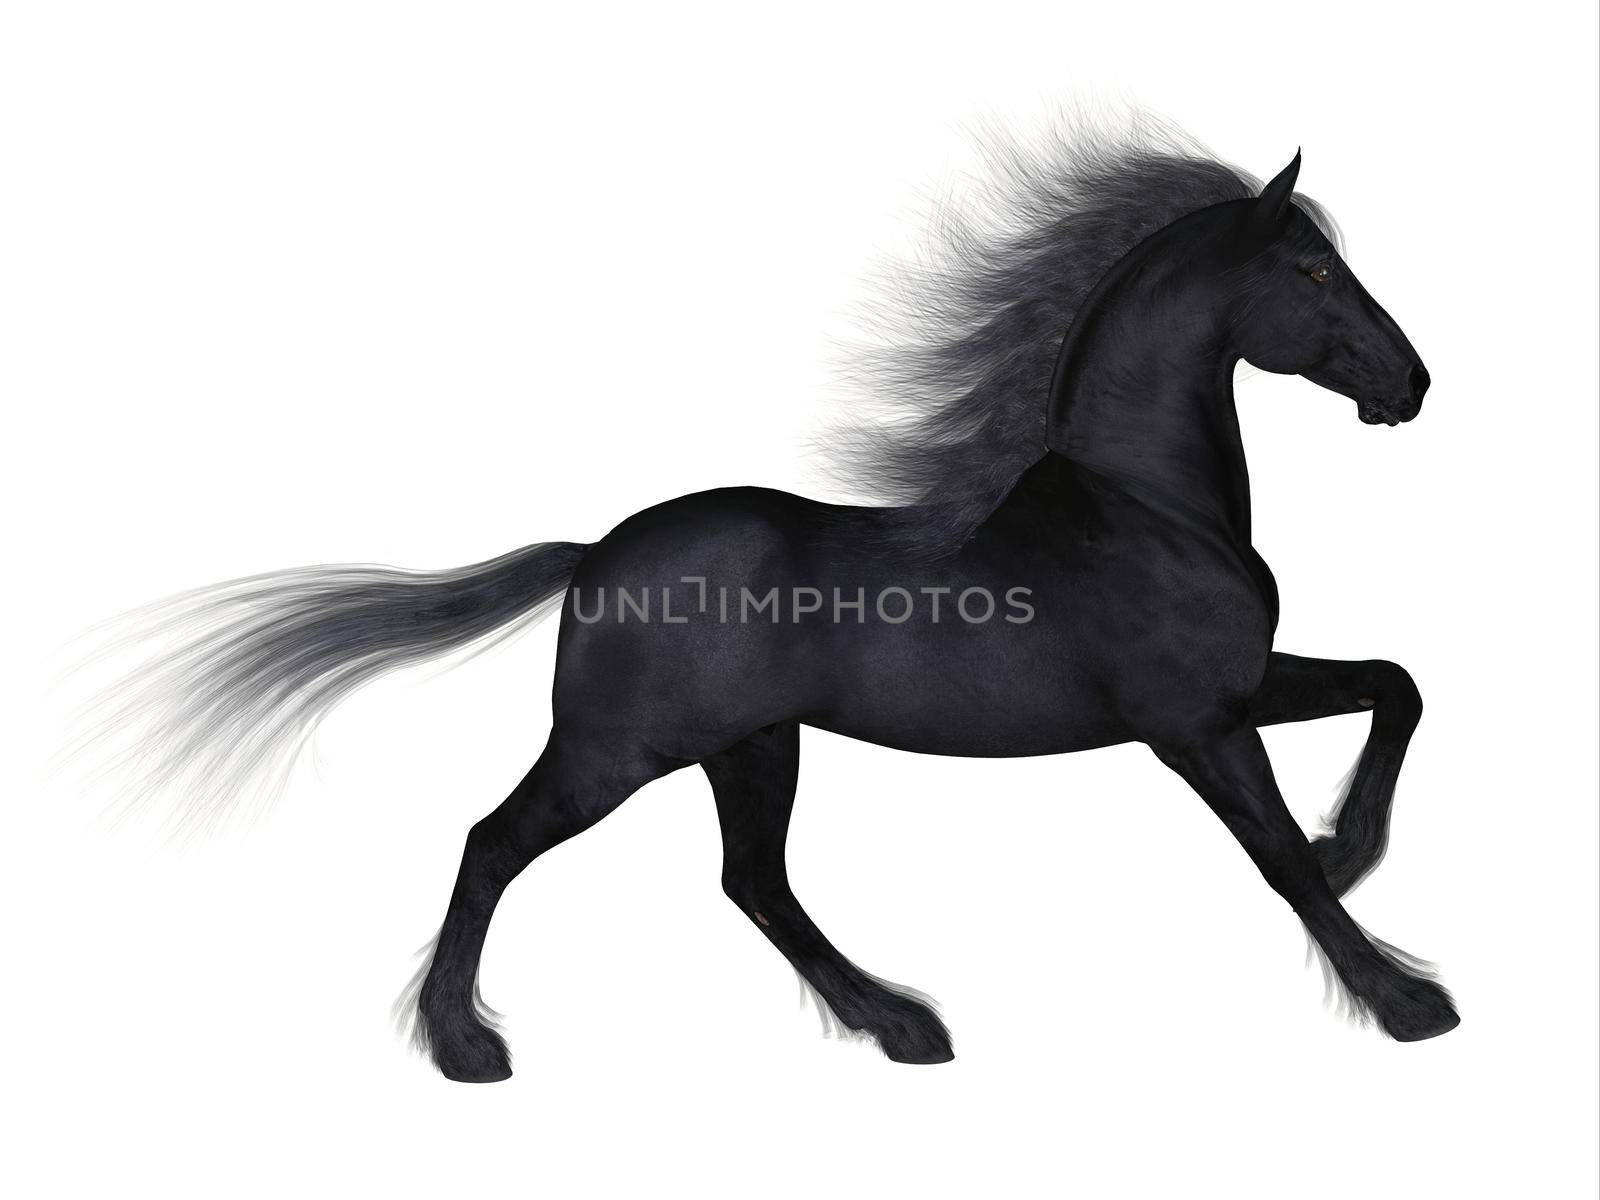 The Friesian is a distinctive breed of black horse developed in Netherlands as a light draft to do farm work.